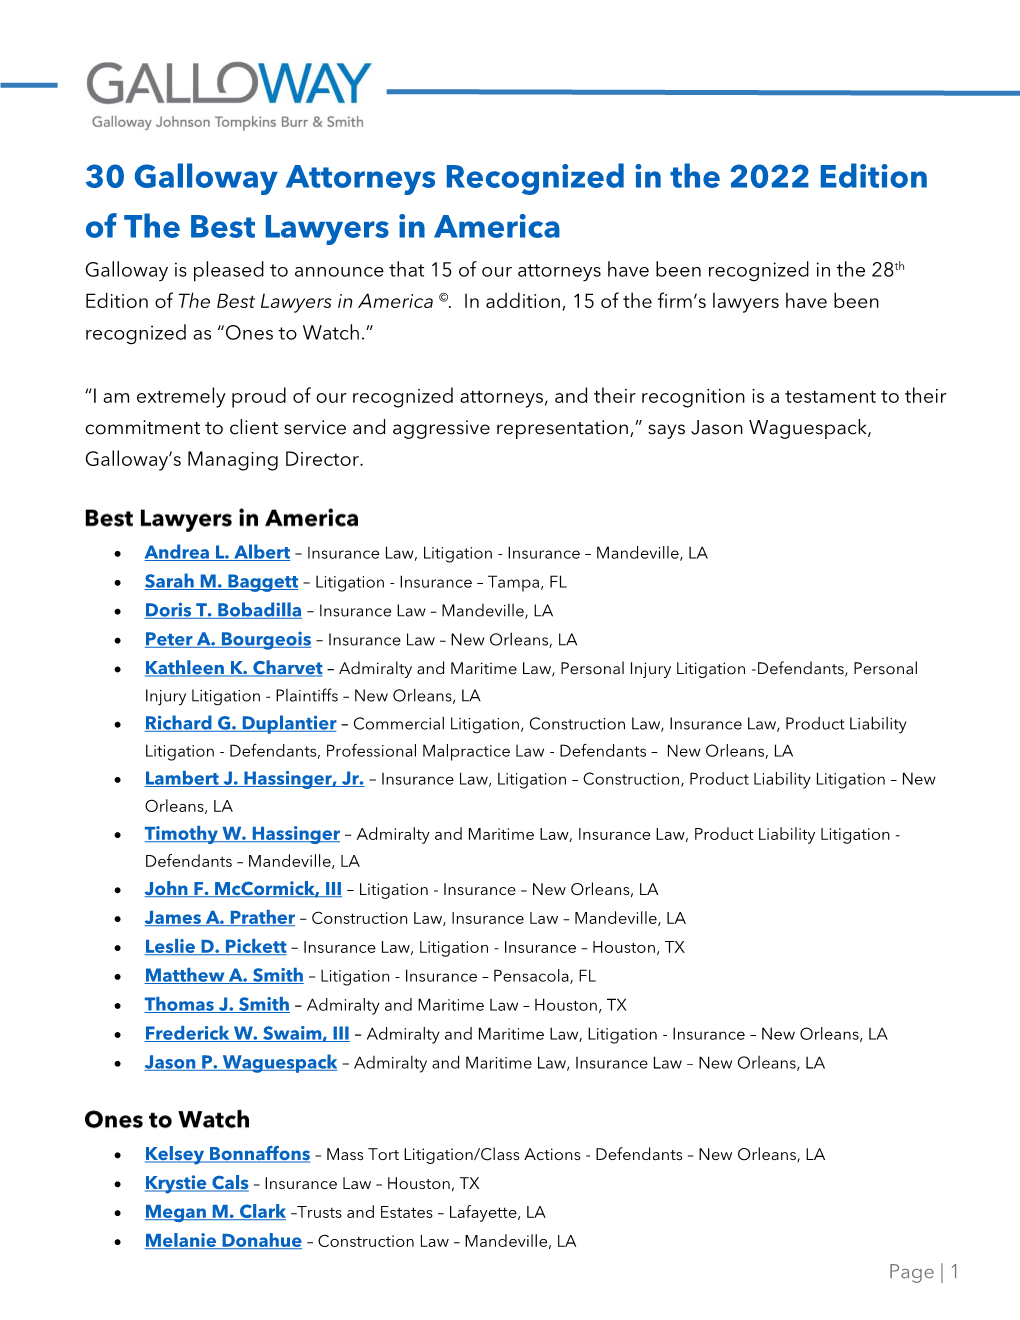 30 Galloway Attorneys Recognized in the 2022 Edition of the Best